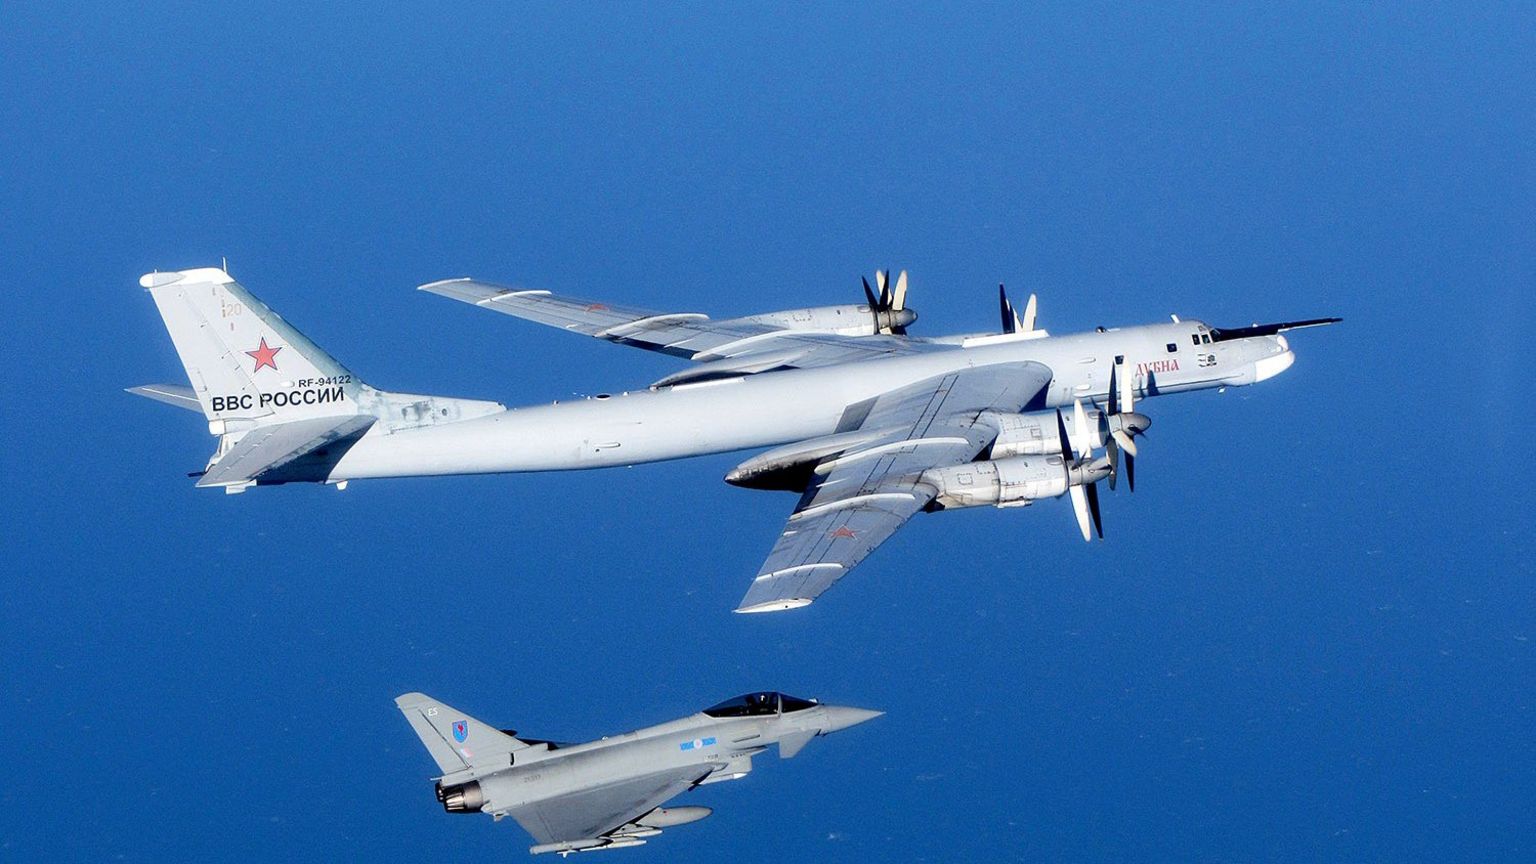 Russian Bear aircraft escorted by a Royal Air Force Quick Reaction Alert Typhoon in September 2014